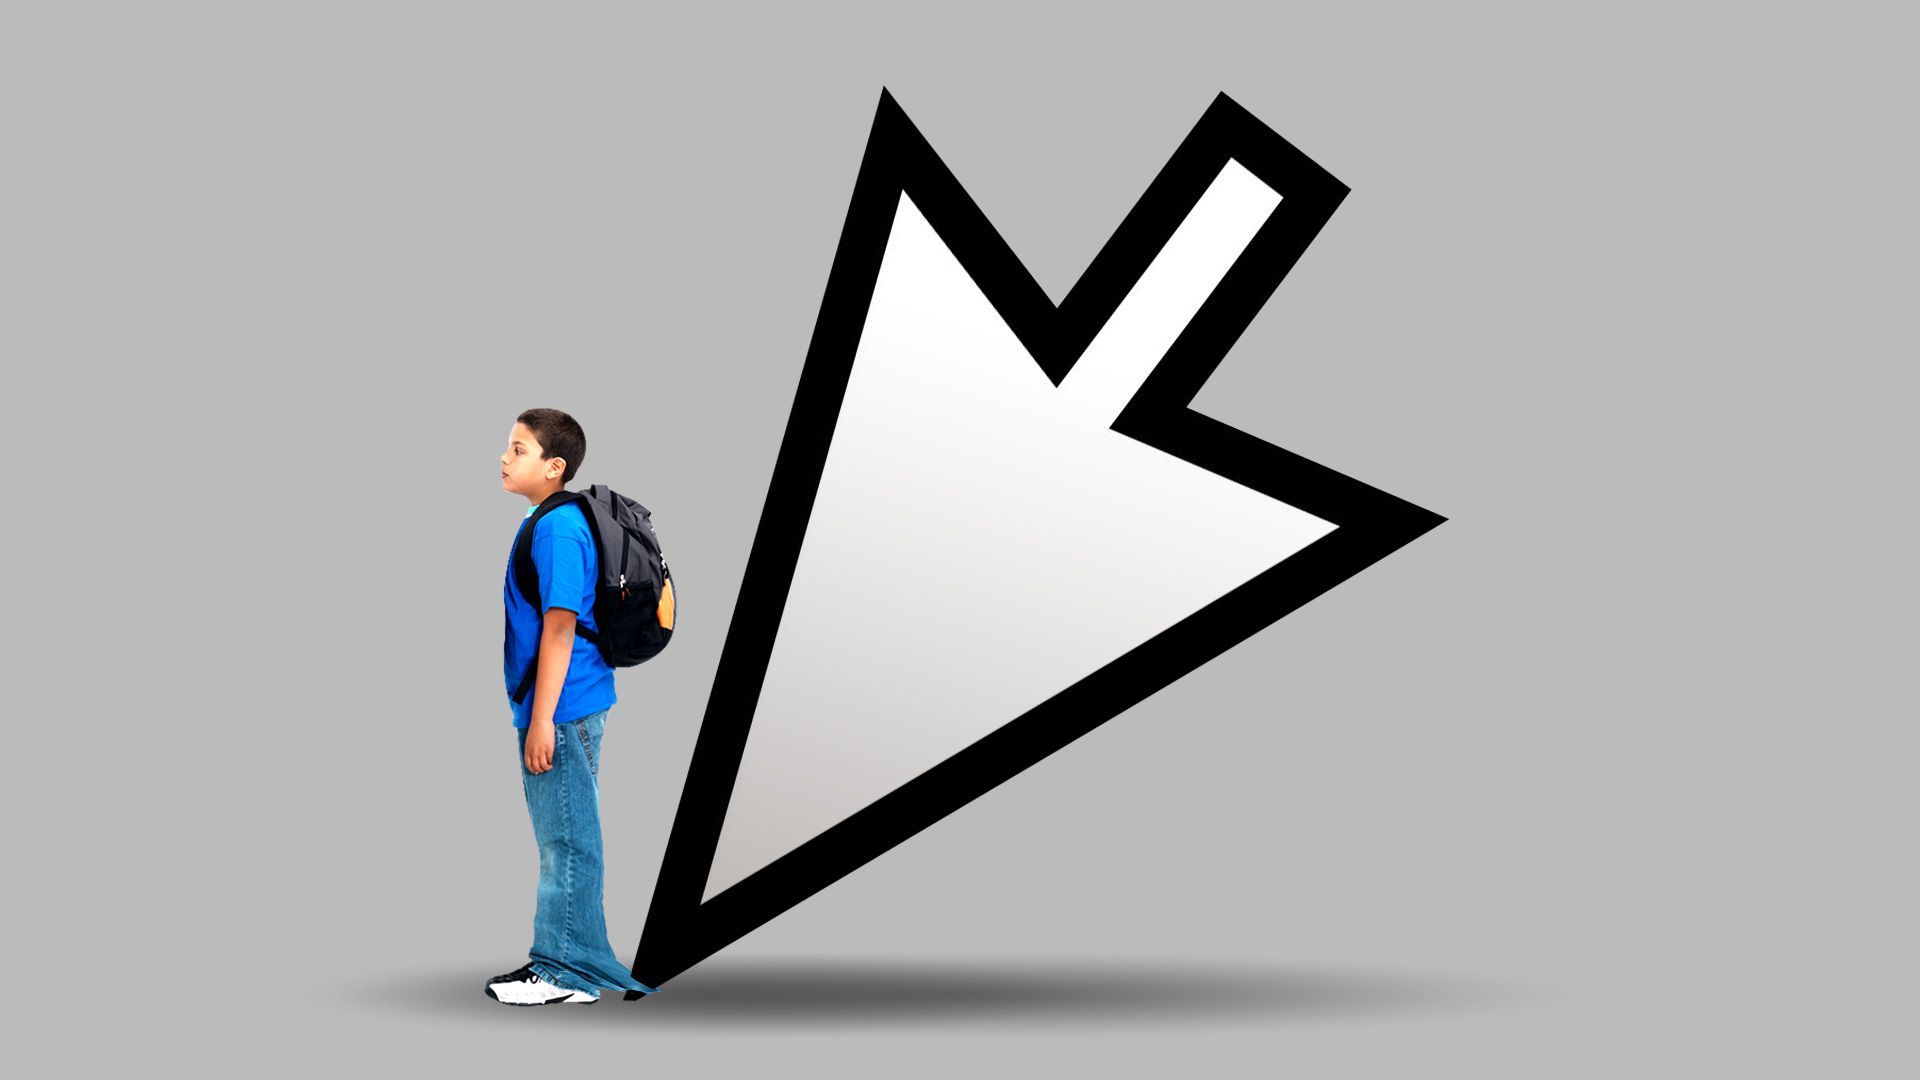 Illustration of a student being held from walking forward by an arrow cursor piercing their pant leg